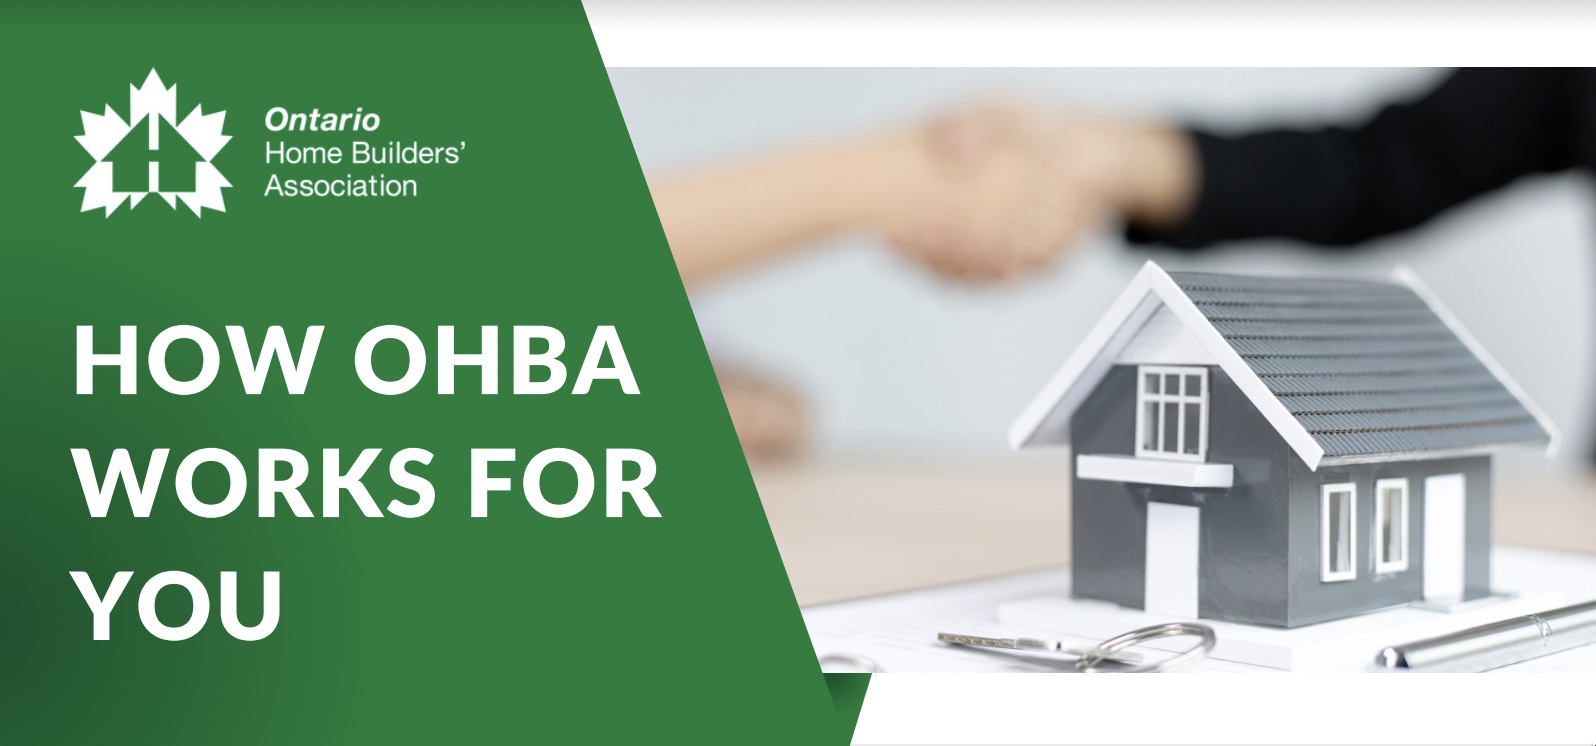 How HBA Works For You